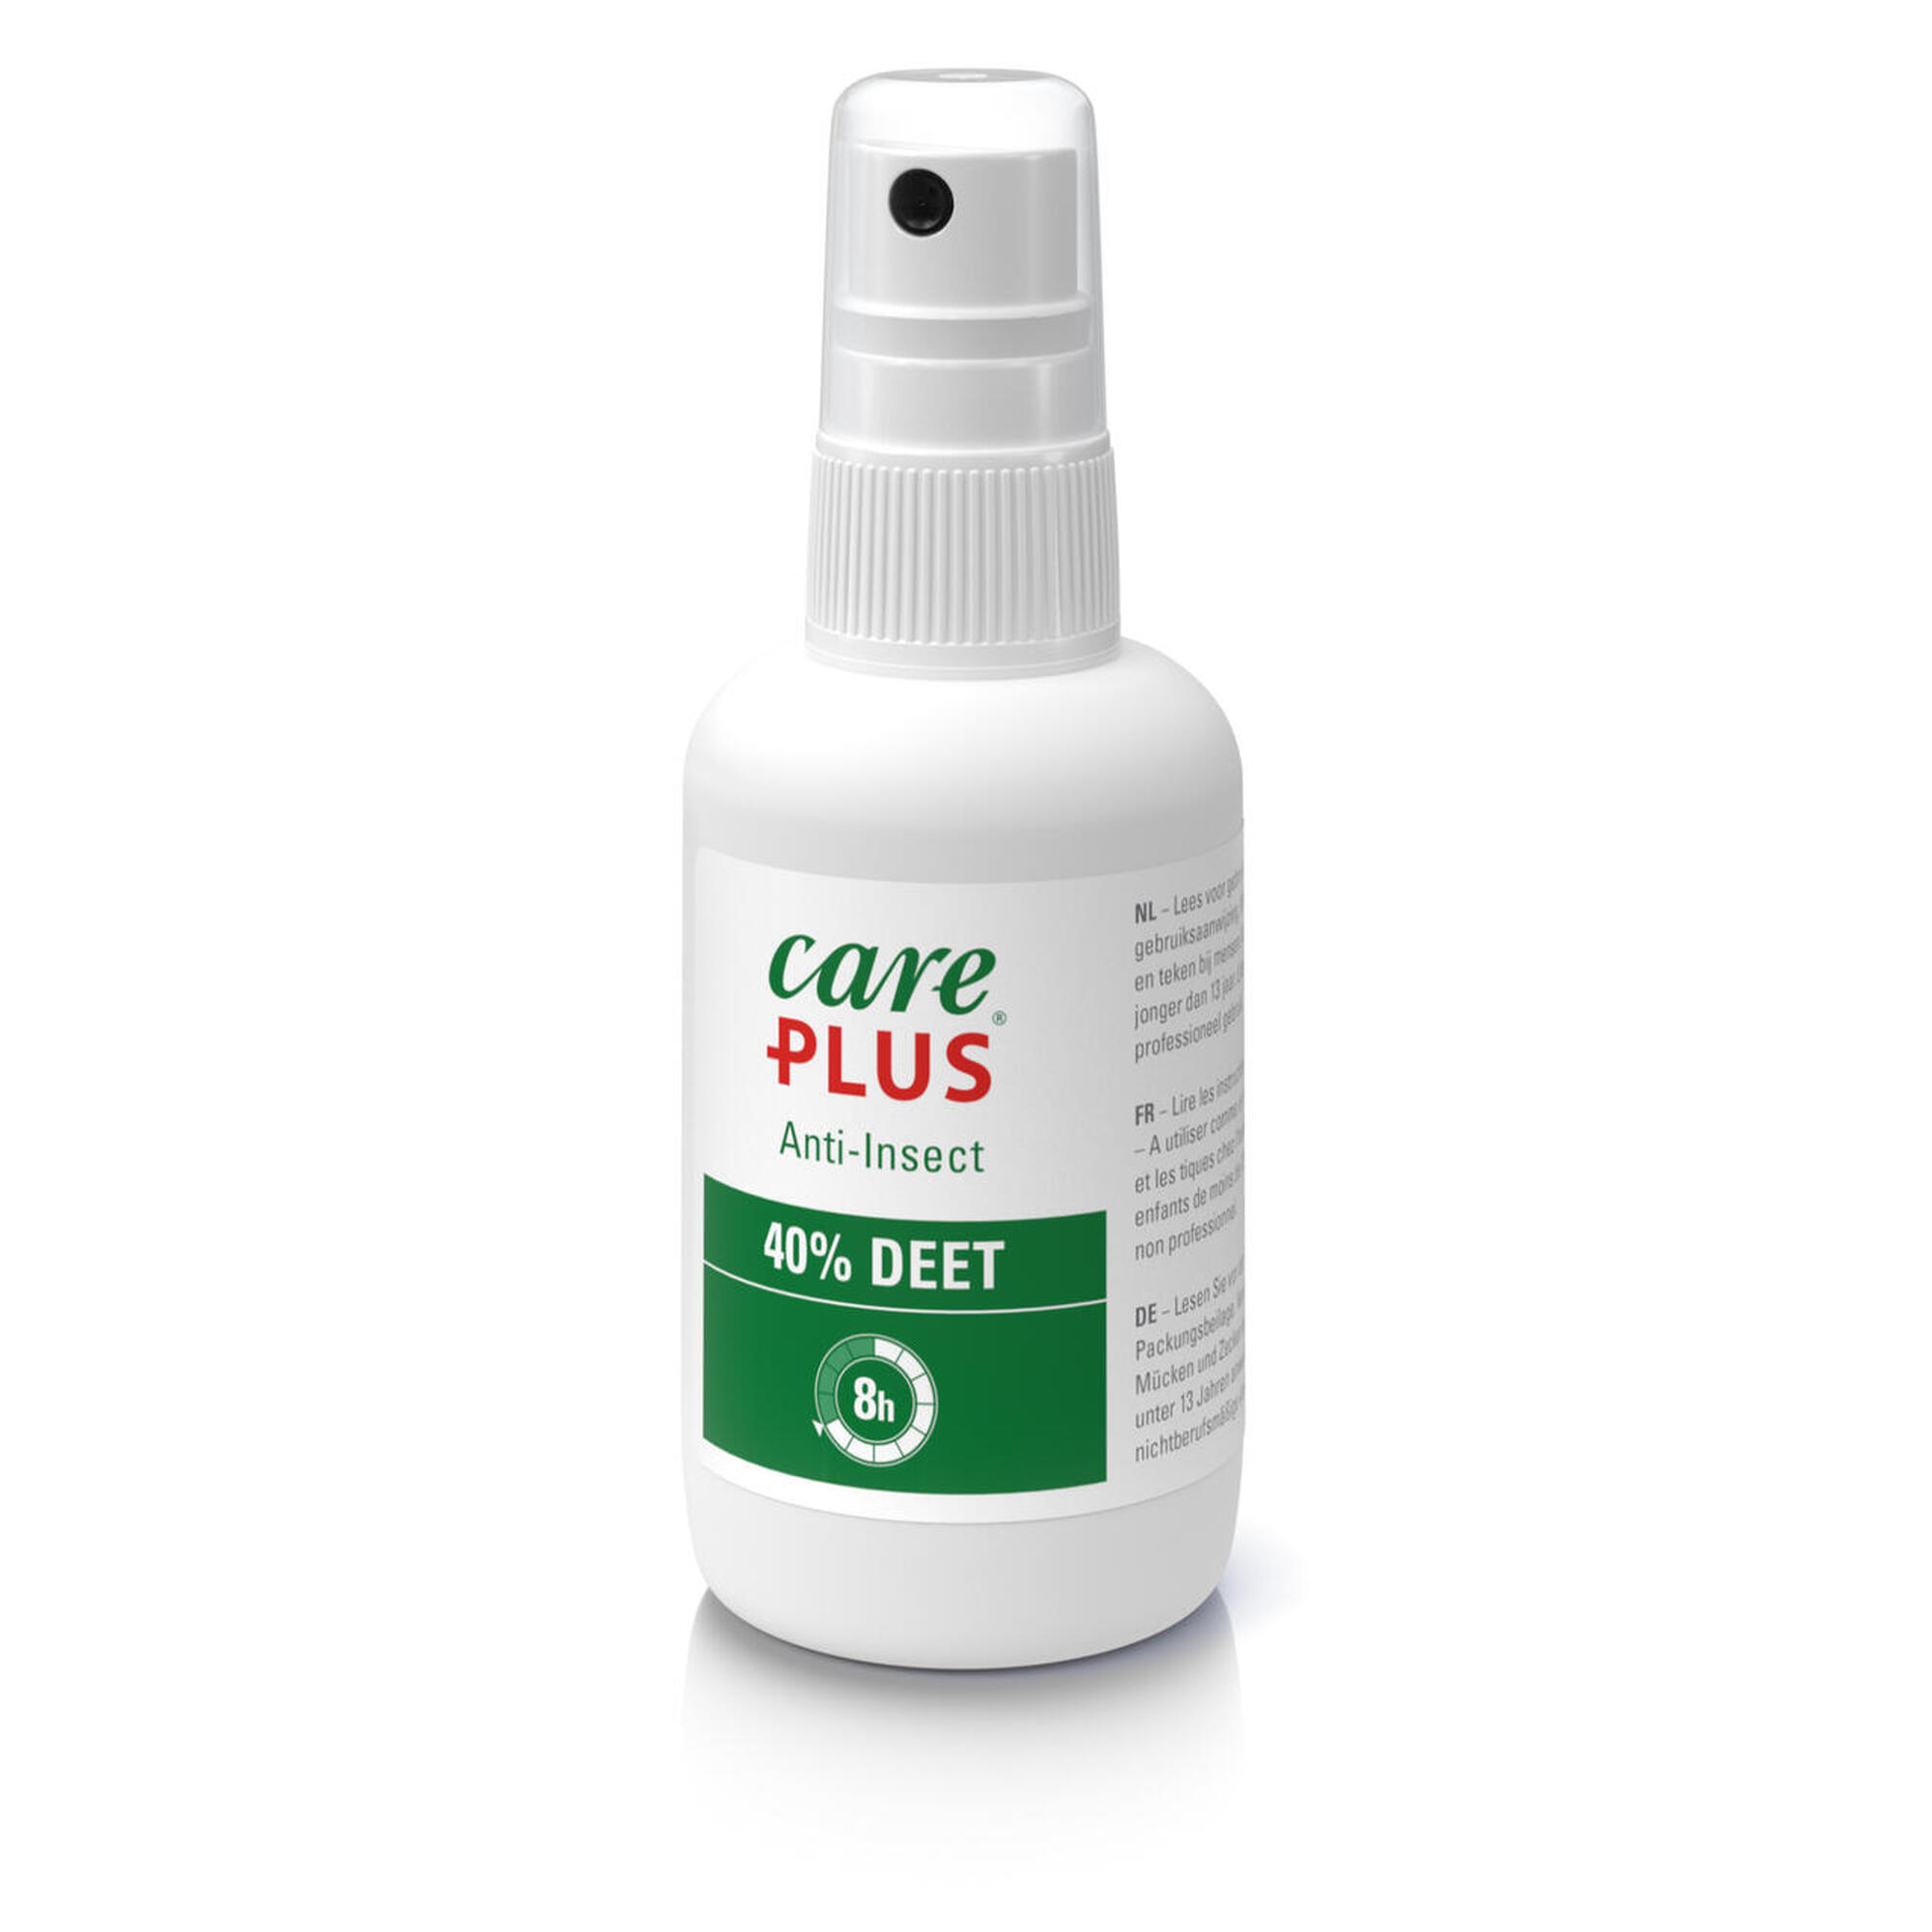 Care Plus Anti-Insect Deet 40% spray 60 ml